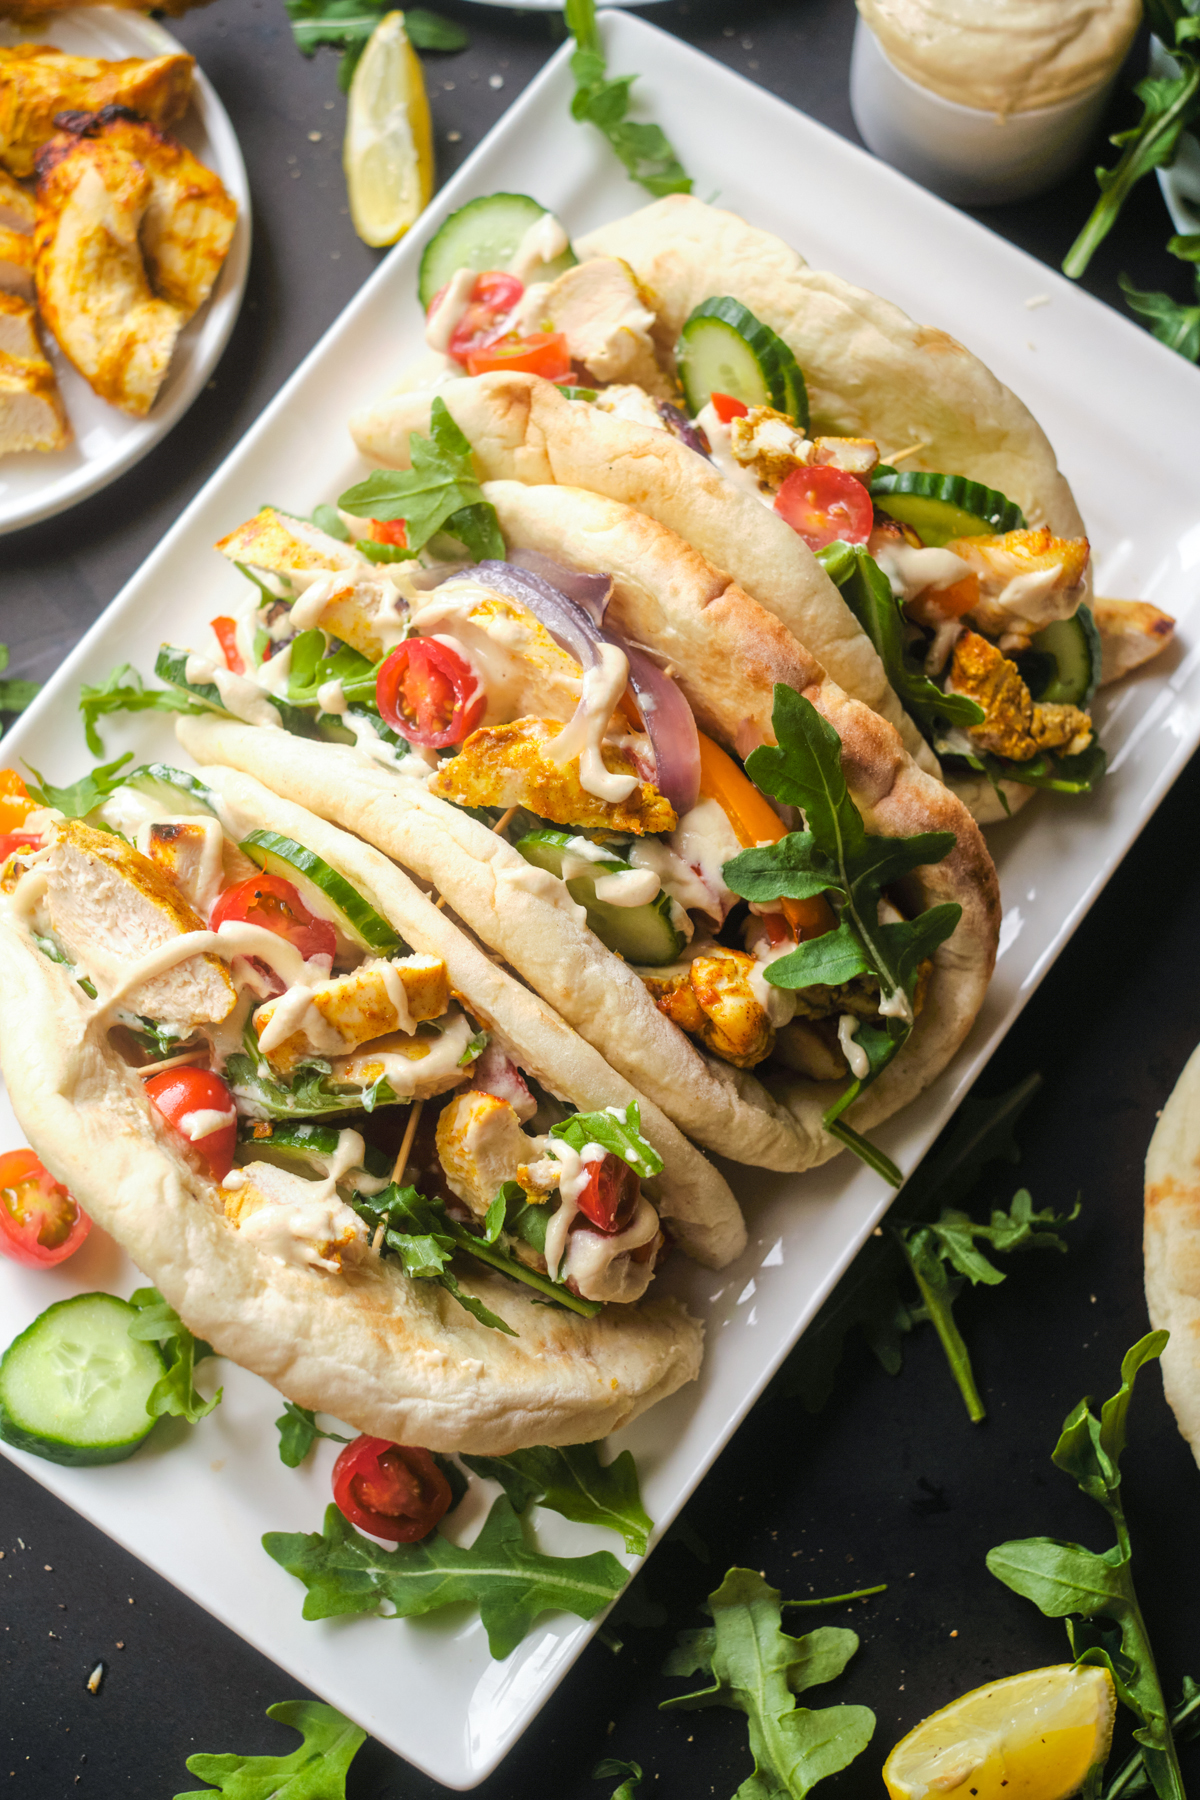 chicken shawarma with tomatoes, cucumber, arugula and topped with tahini sauce in pitas